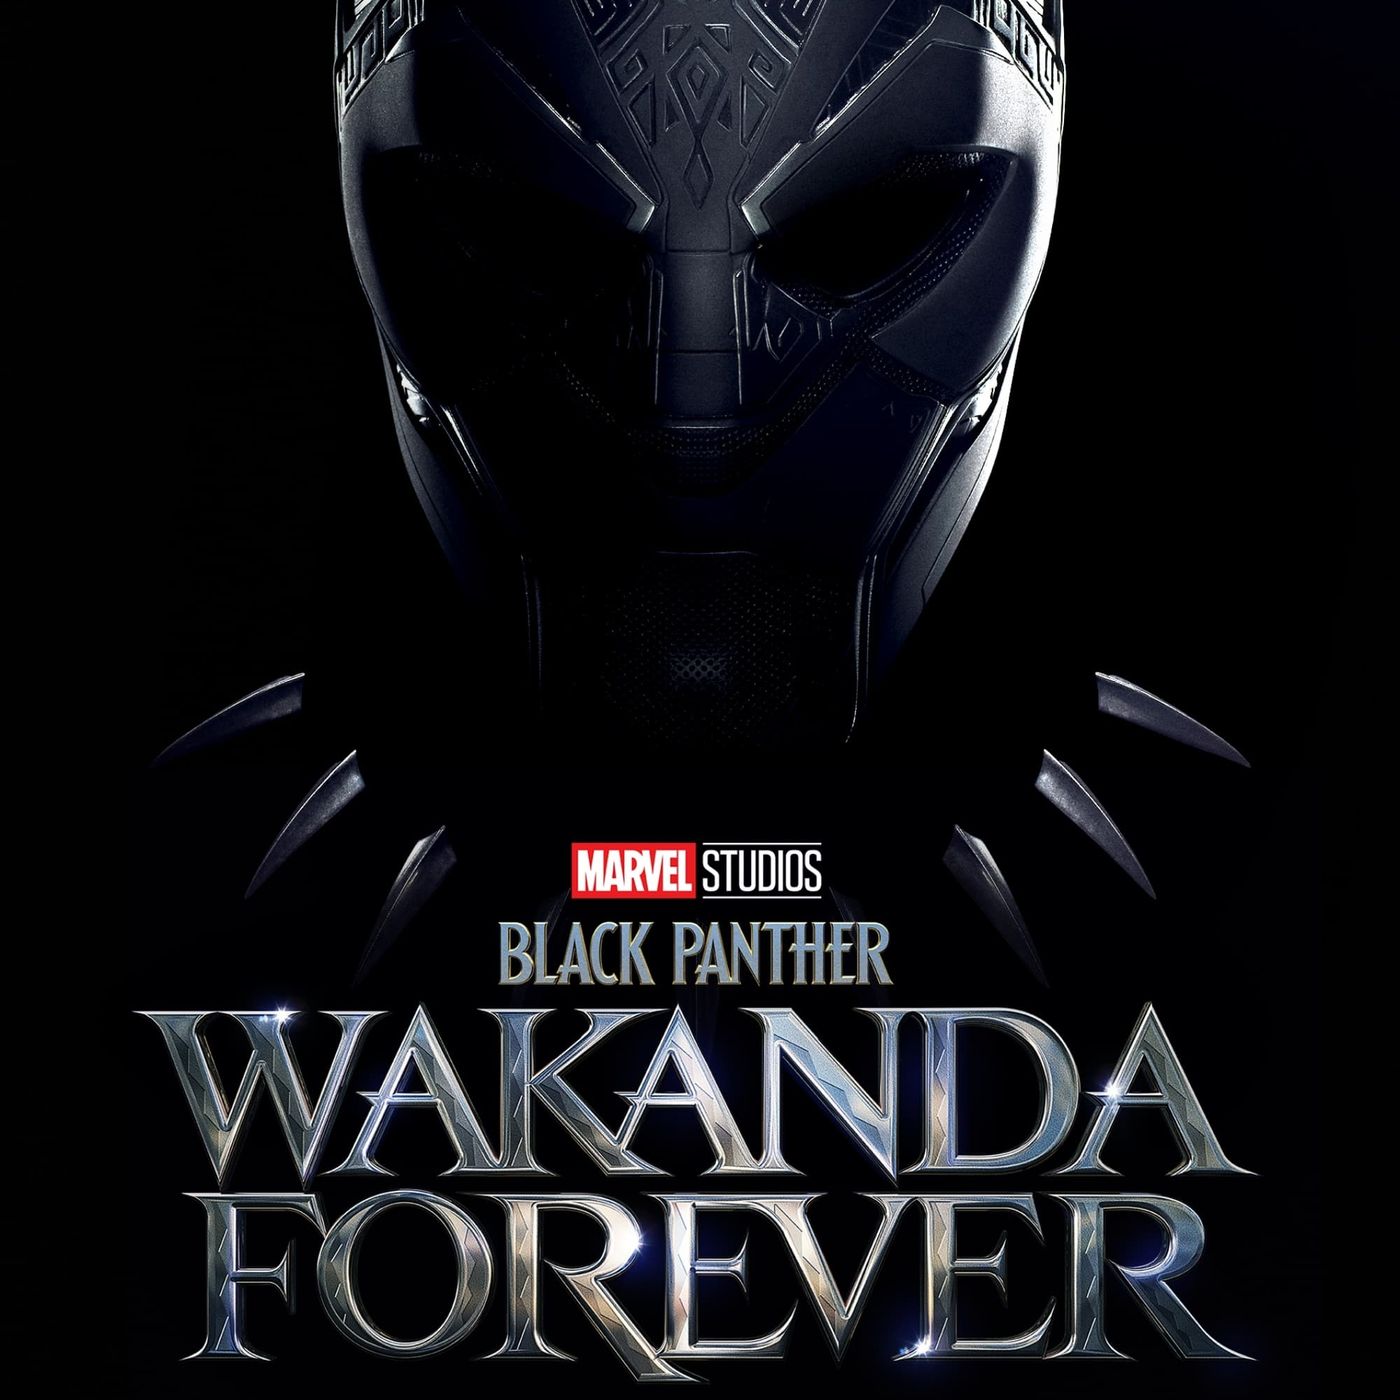 Back to the Box Office: Black Panther Wakanda Forever Review